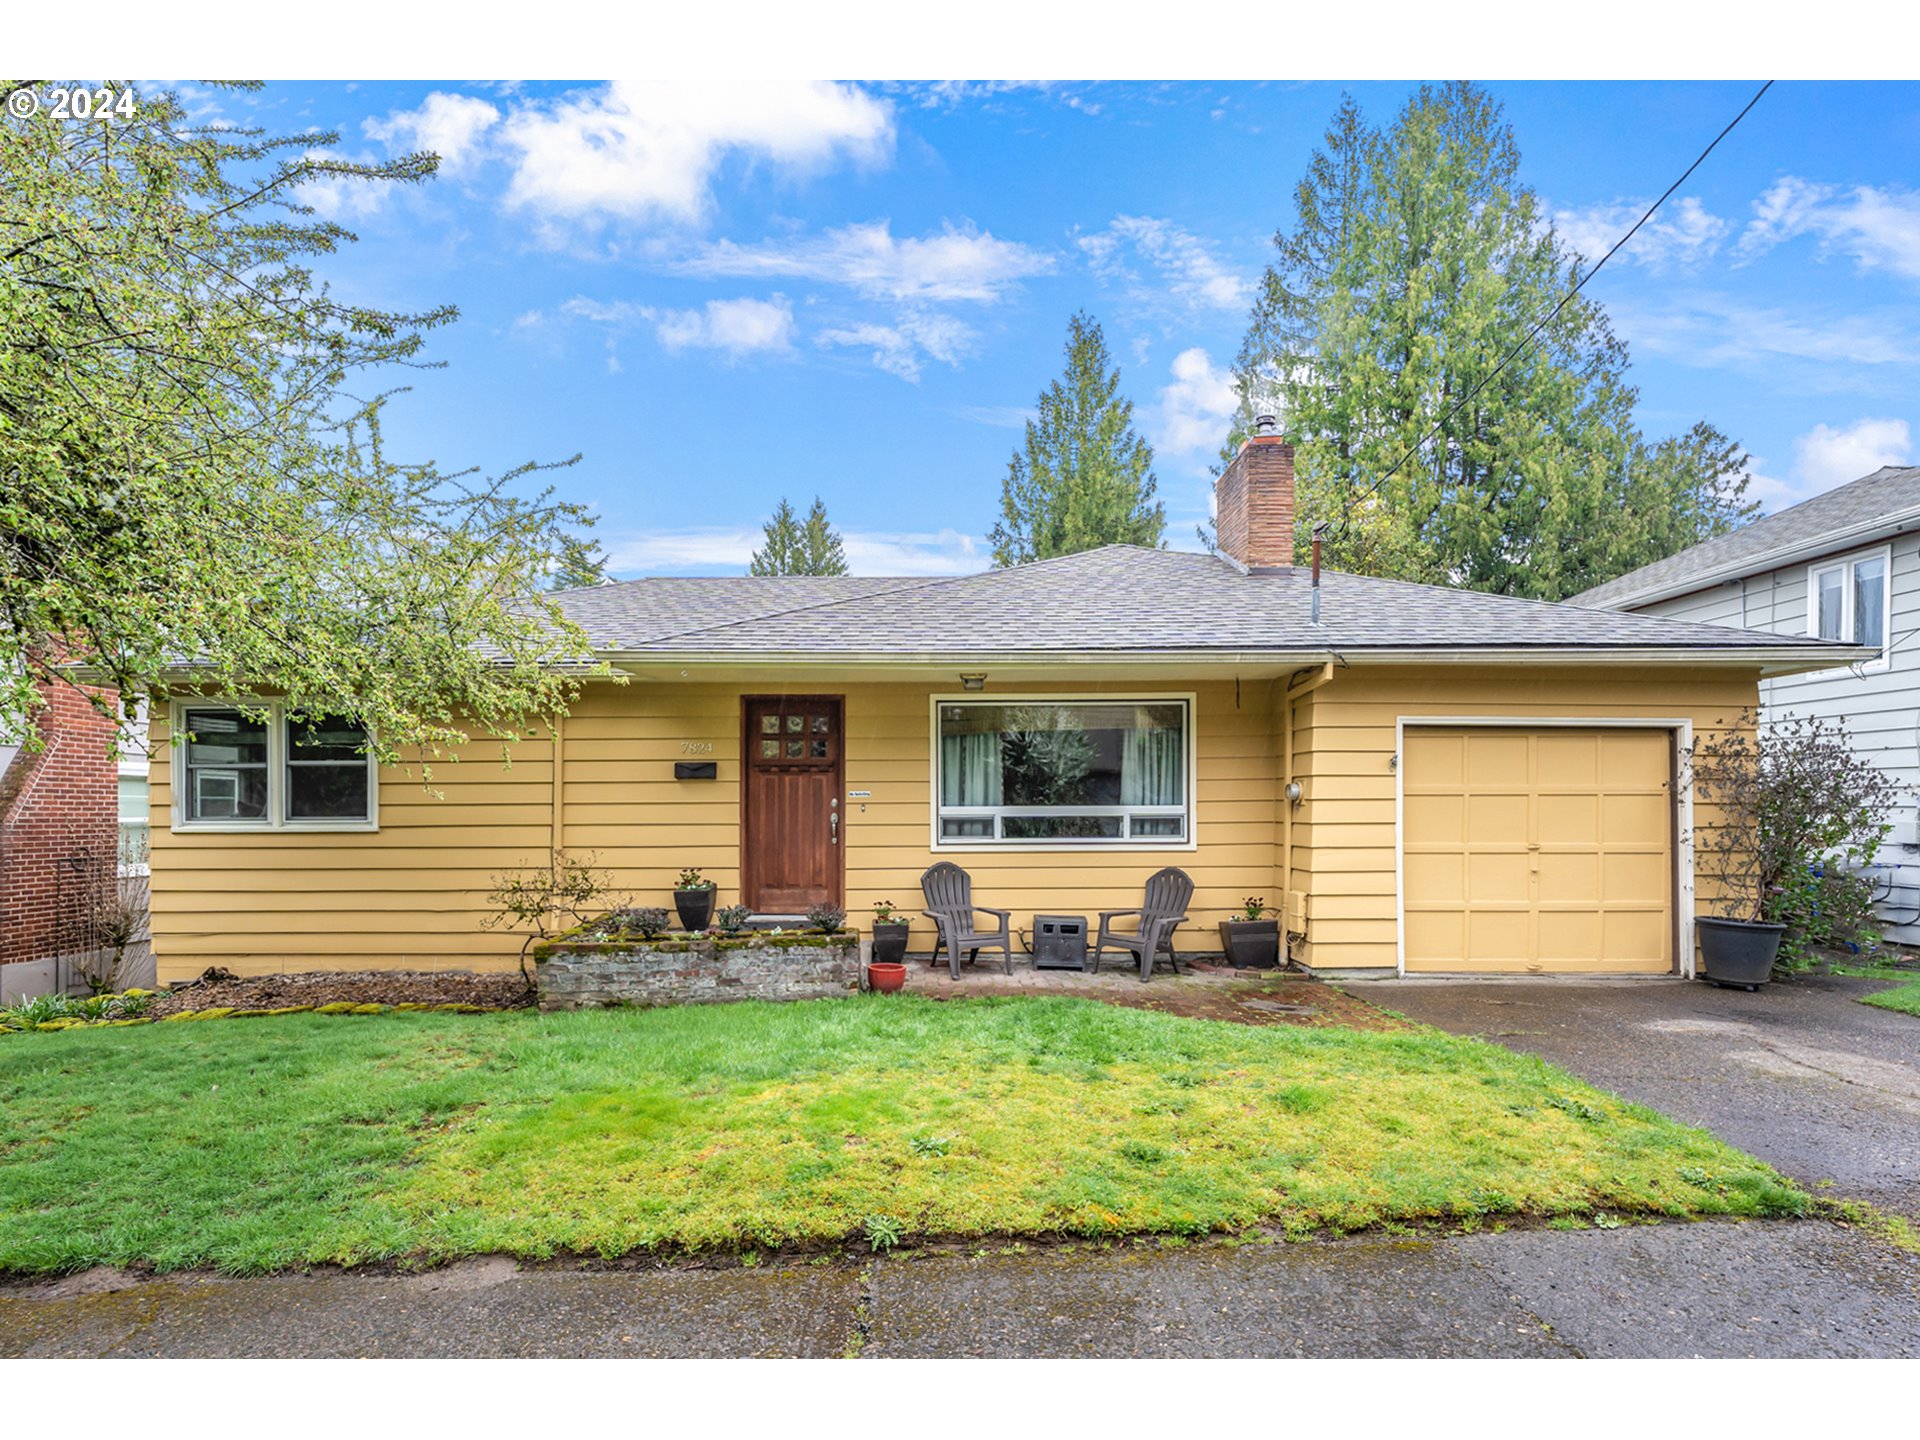 7824 SW 5TH AVE, Portland, OR 